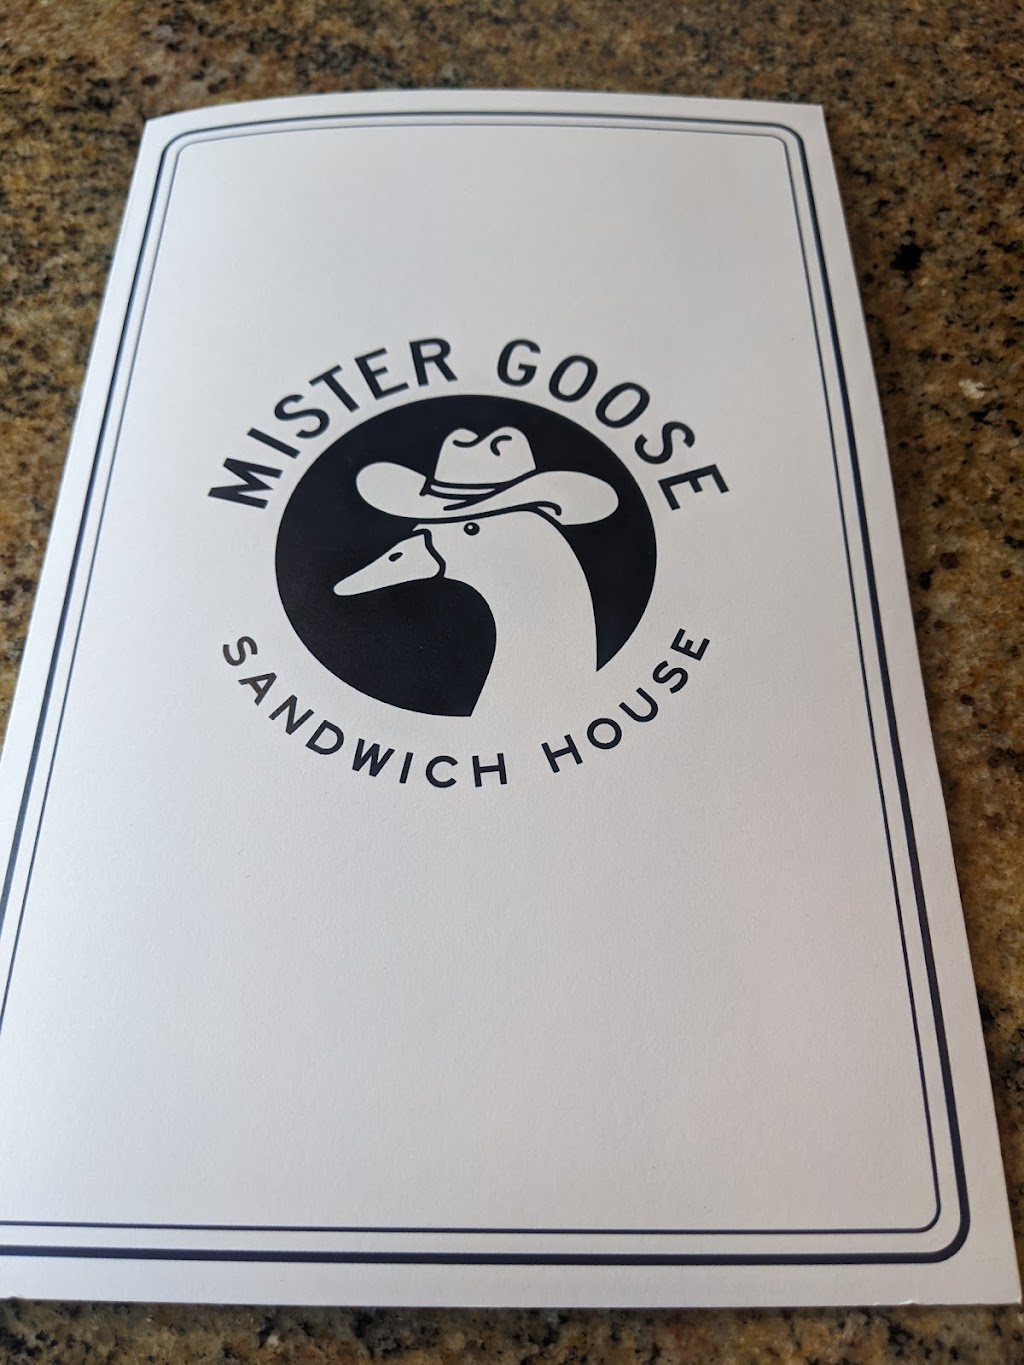 Mister Goose | restaurant | 58499 Columbia River Hwy, St Helens, OR 97051, USA